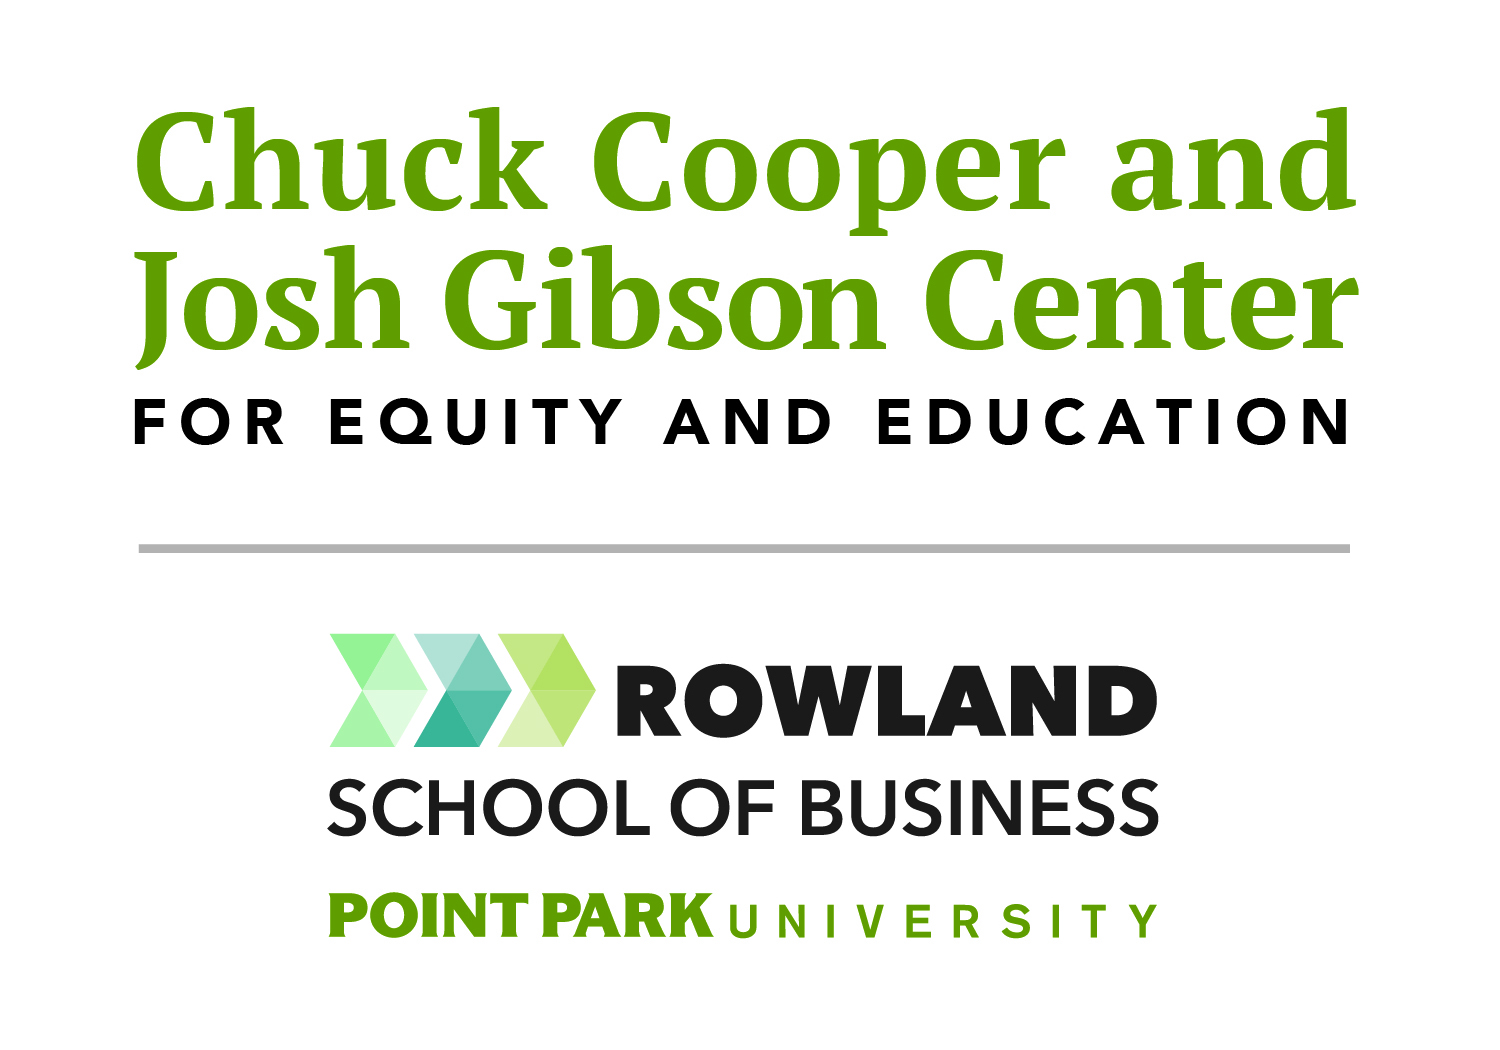 Pictured is the Chuck Cooper and Josh Gibson Center Equity and Education logo. File photo.